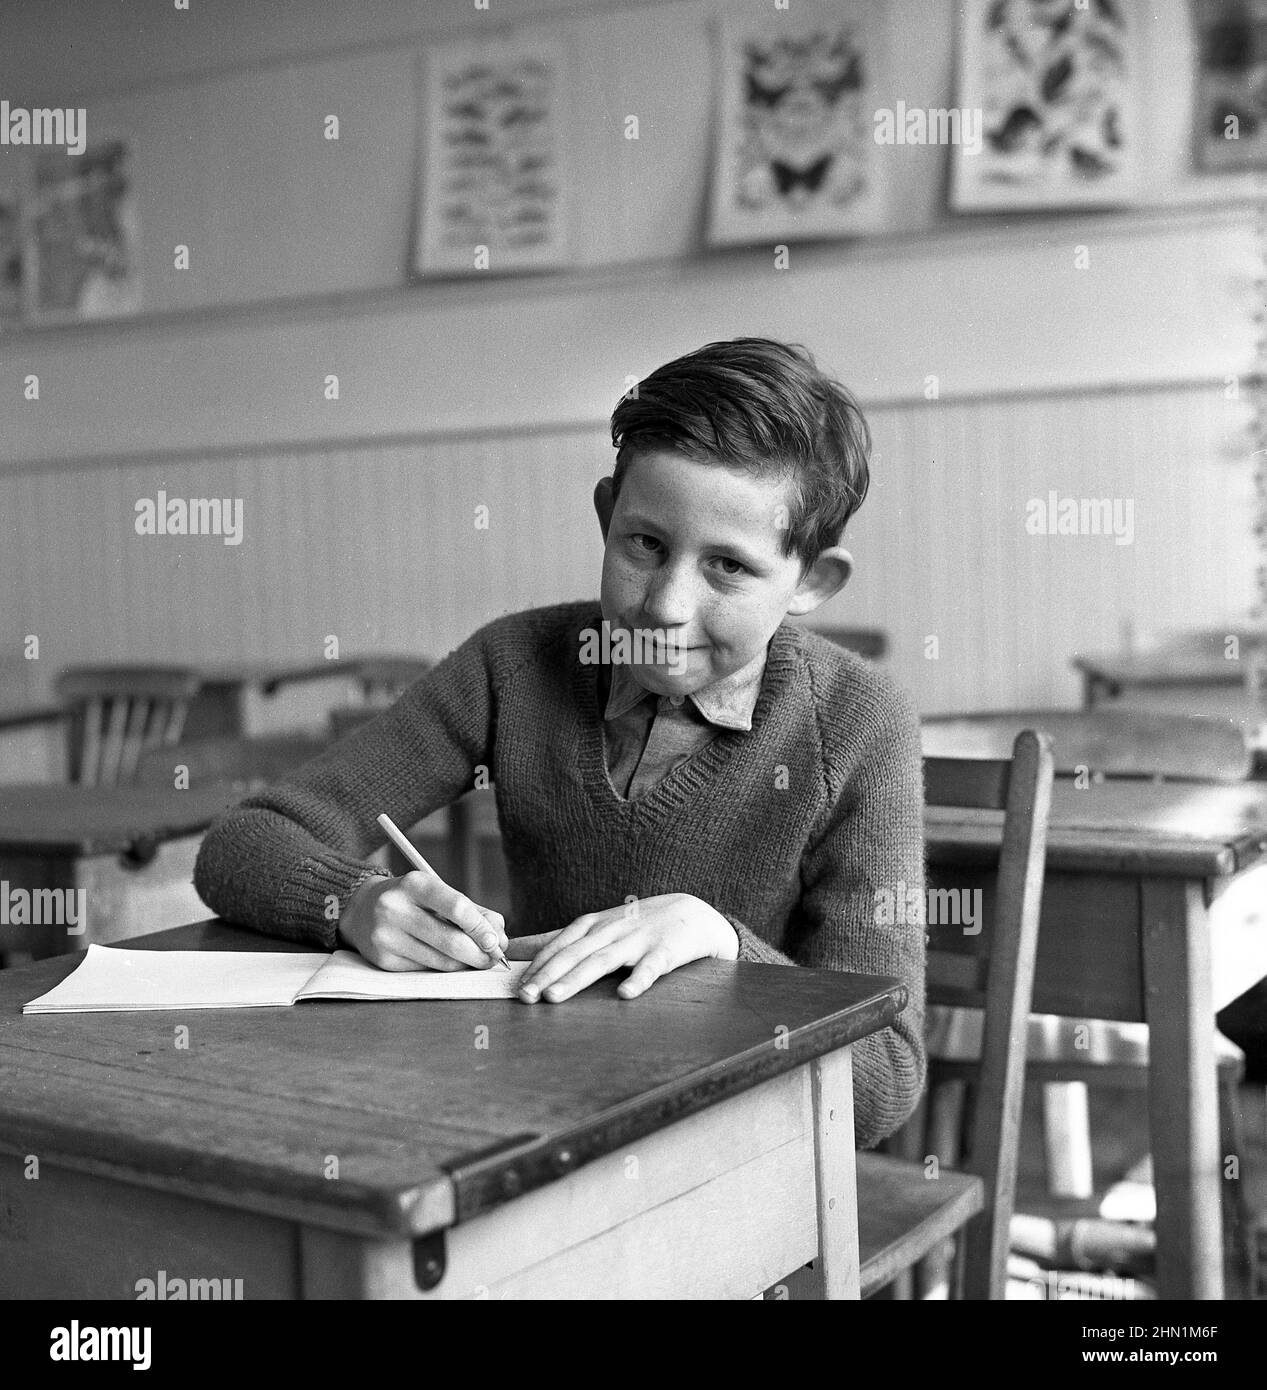 1960s, historical, young school boy, on his own in a classroom, sitting at a traditional school desk writing in his notebook, Crombie School, Fife, Scotland, UK. Stock Photo